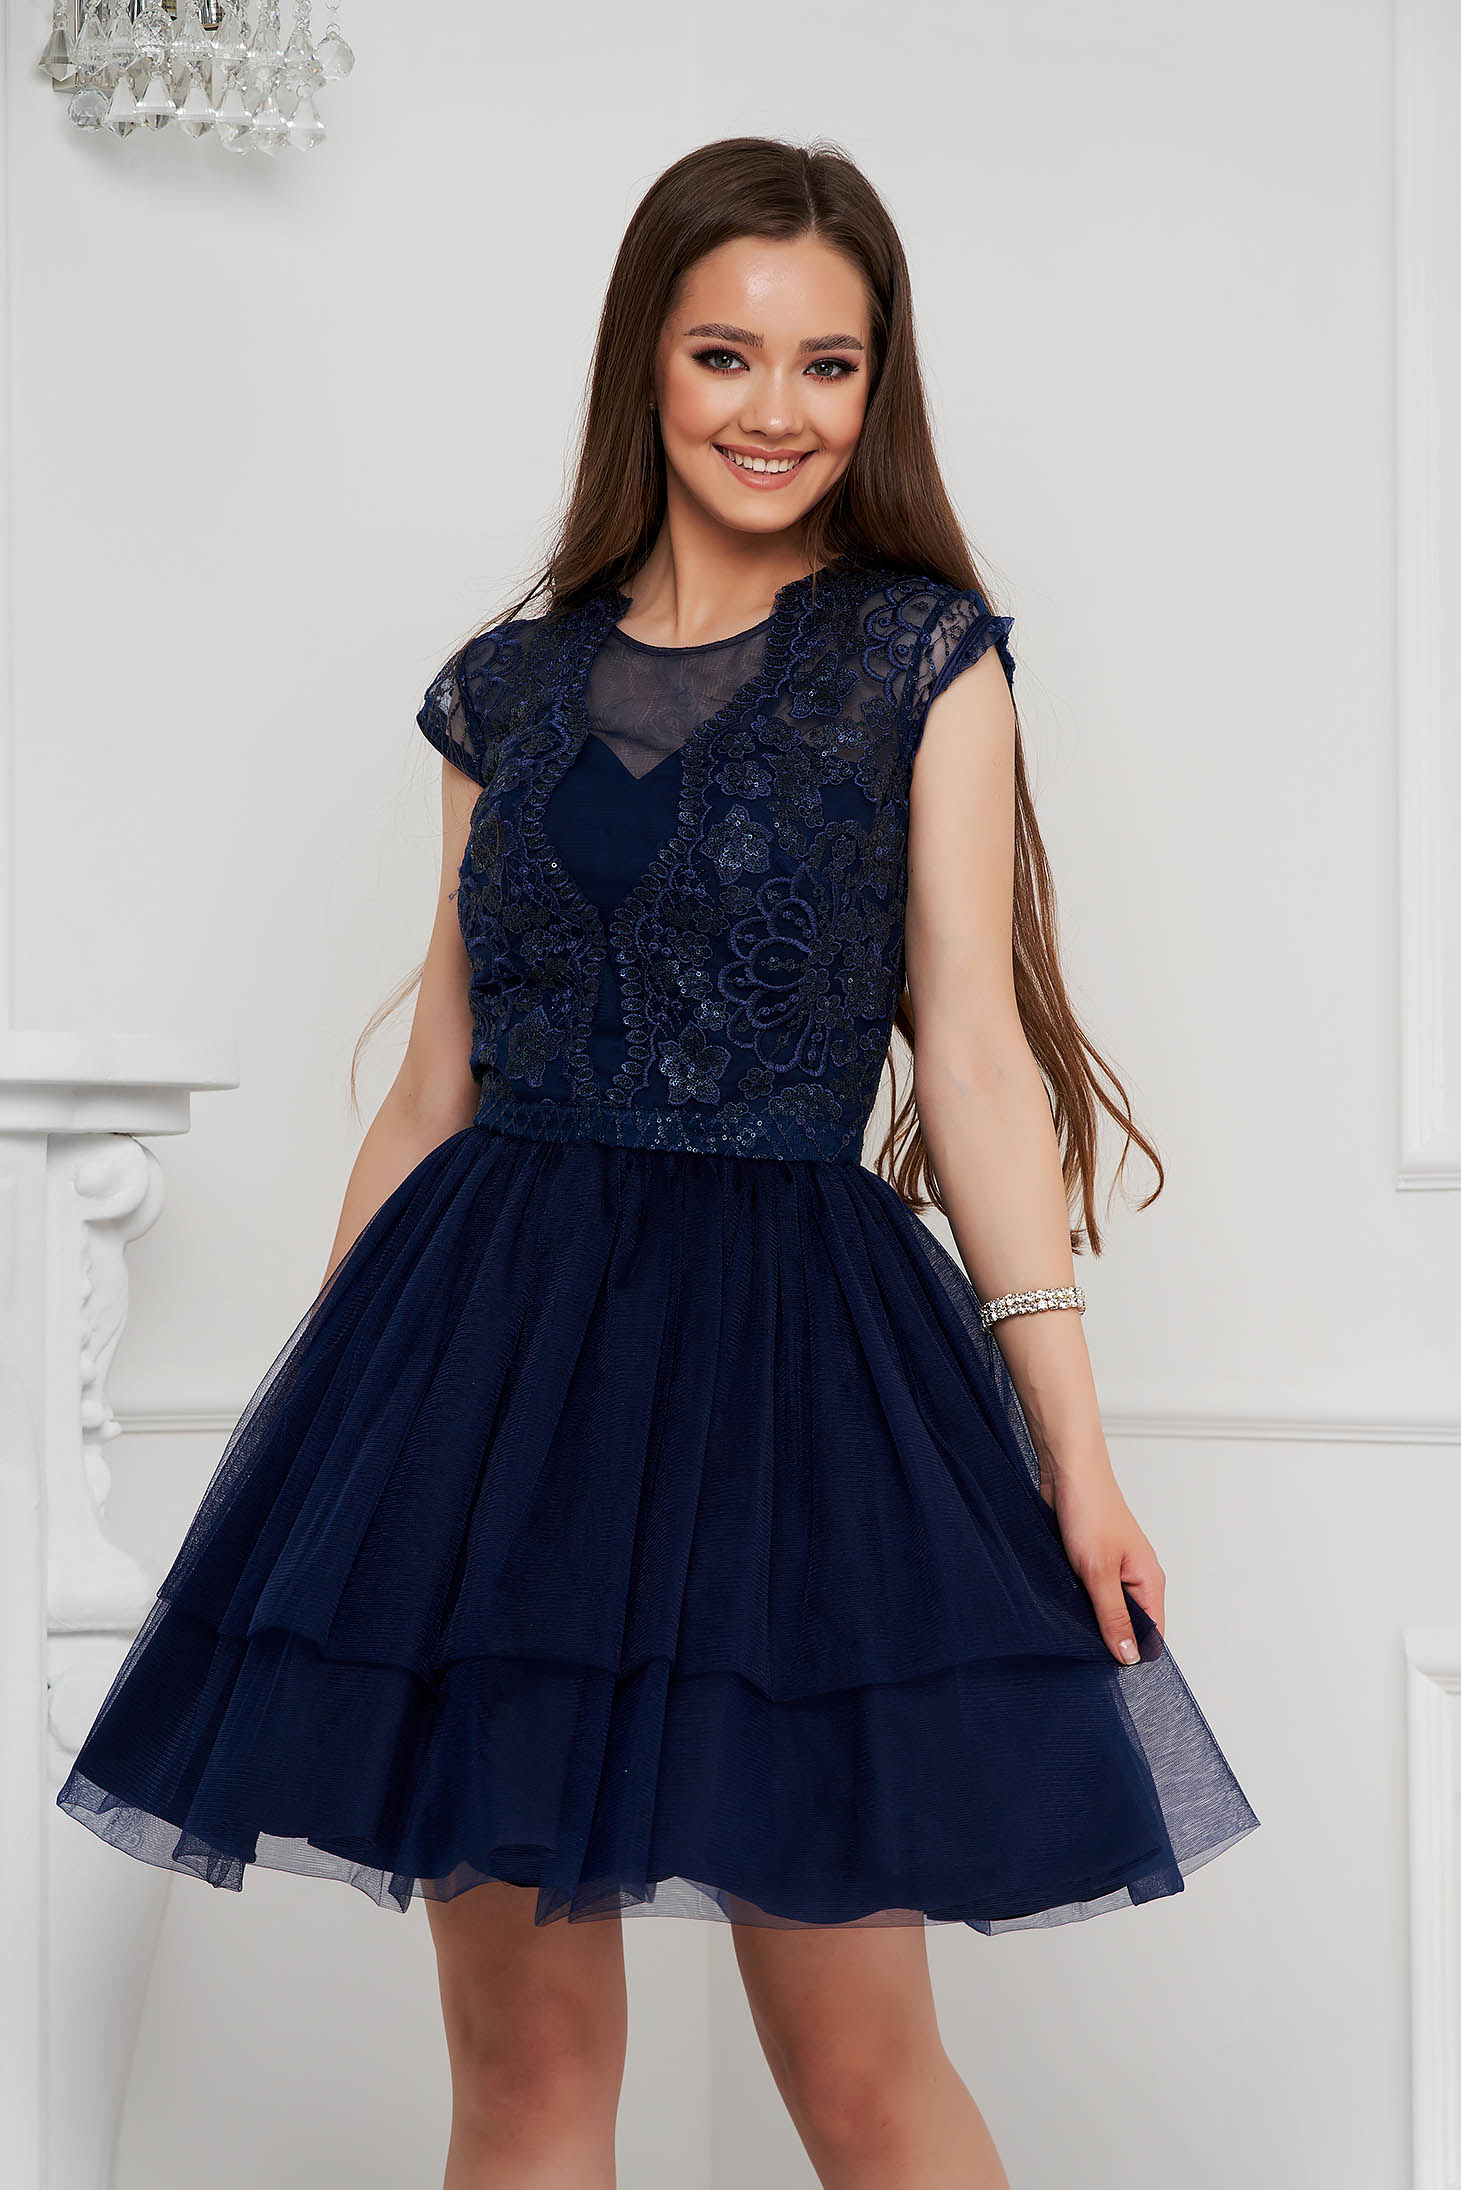 Darkblue dress short cut cloche from tulle with sequin embellished details sleeveless